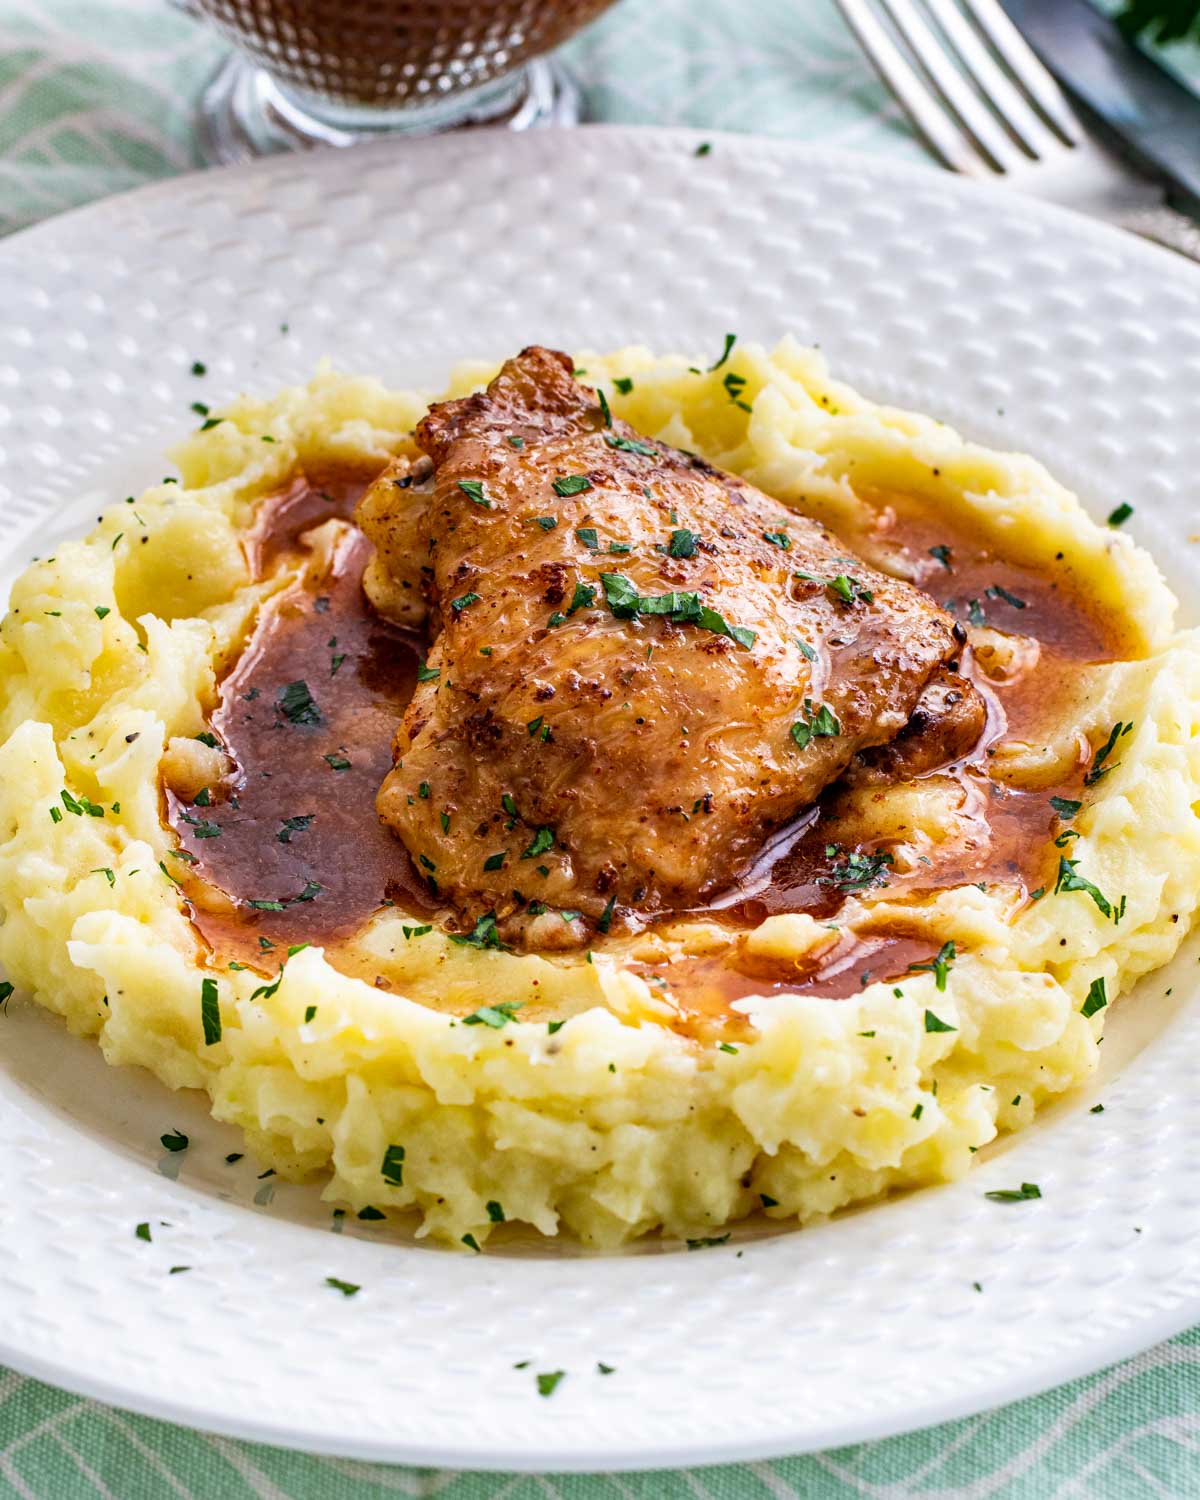 chicken thigh with gravy on a bed of mashed potatoes.